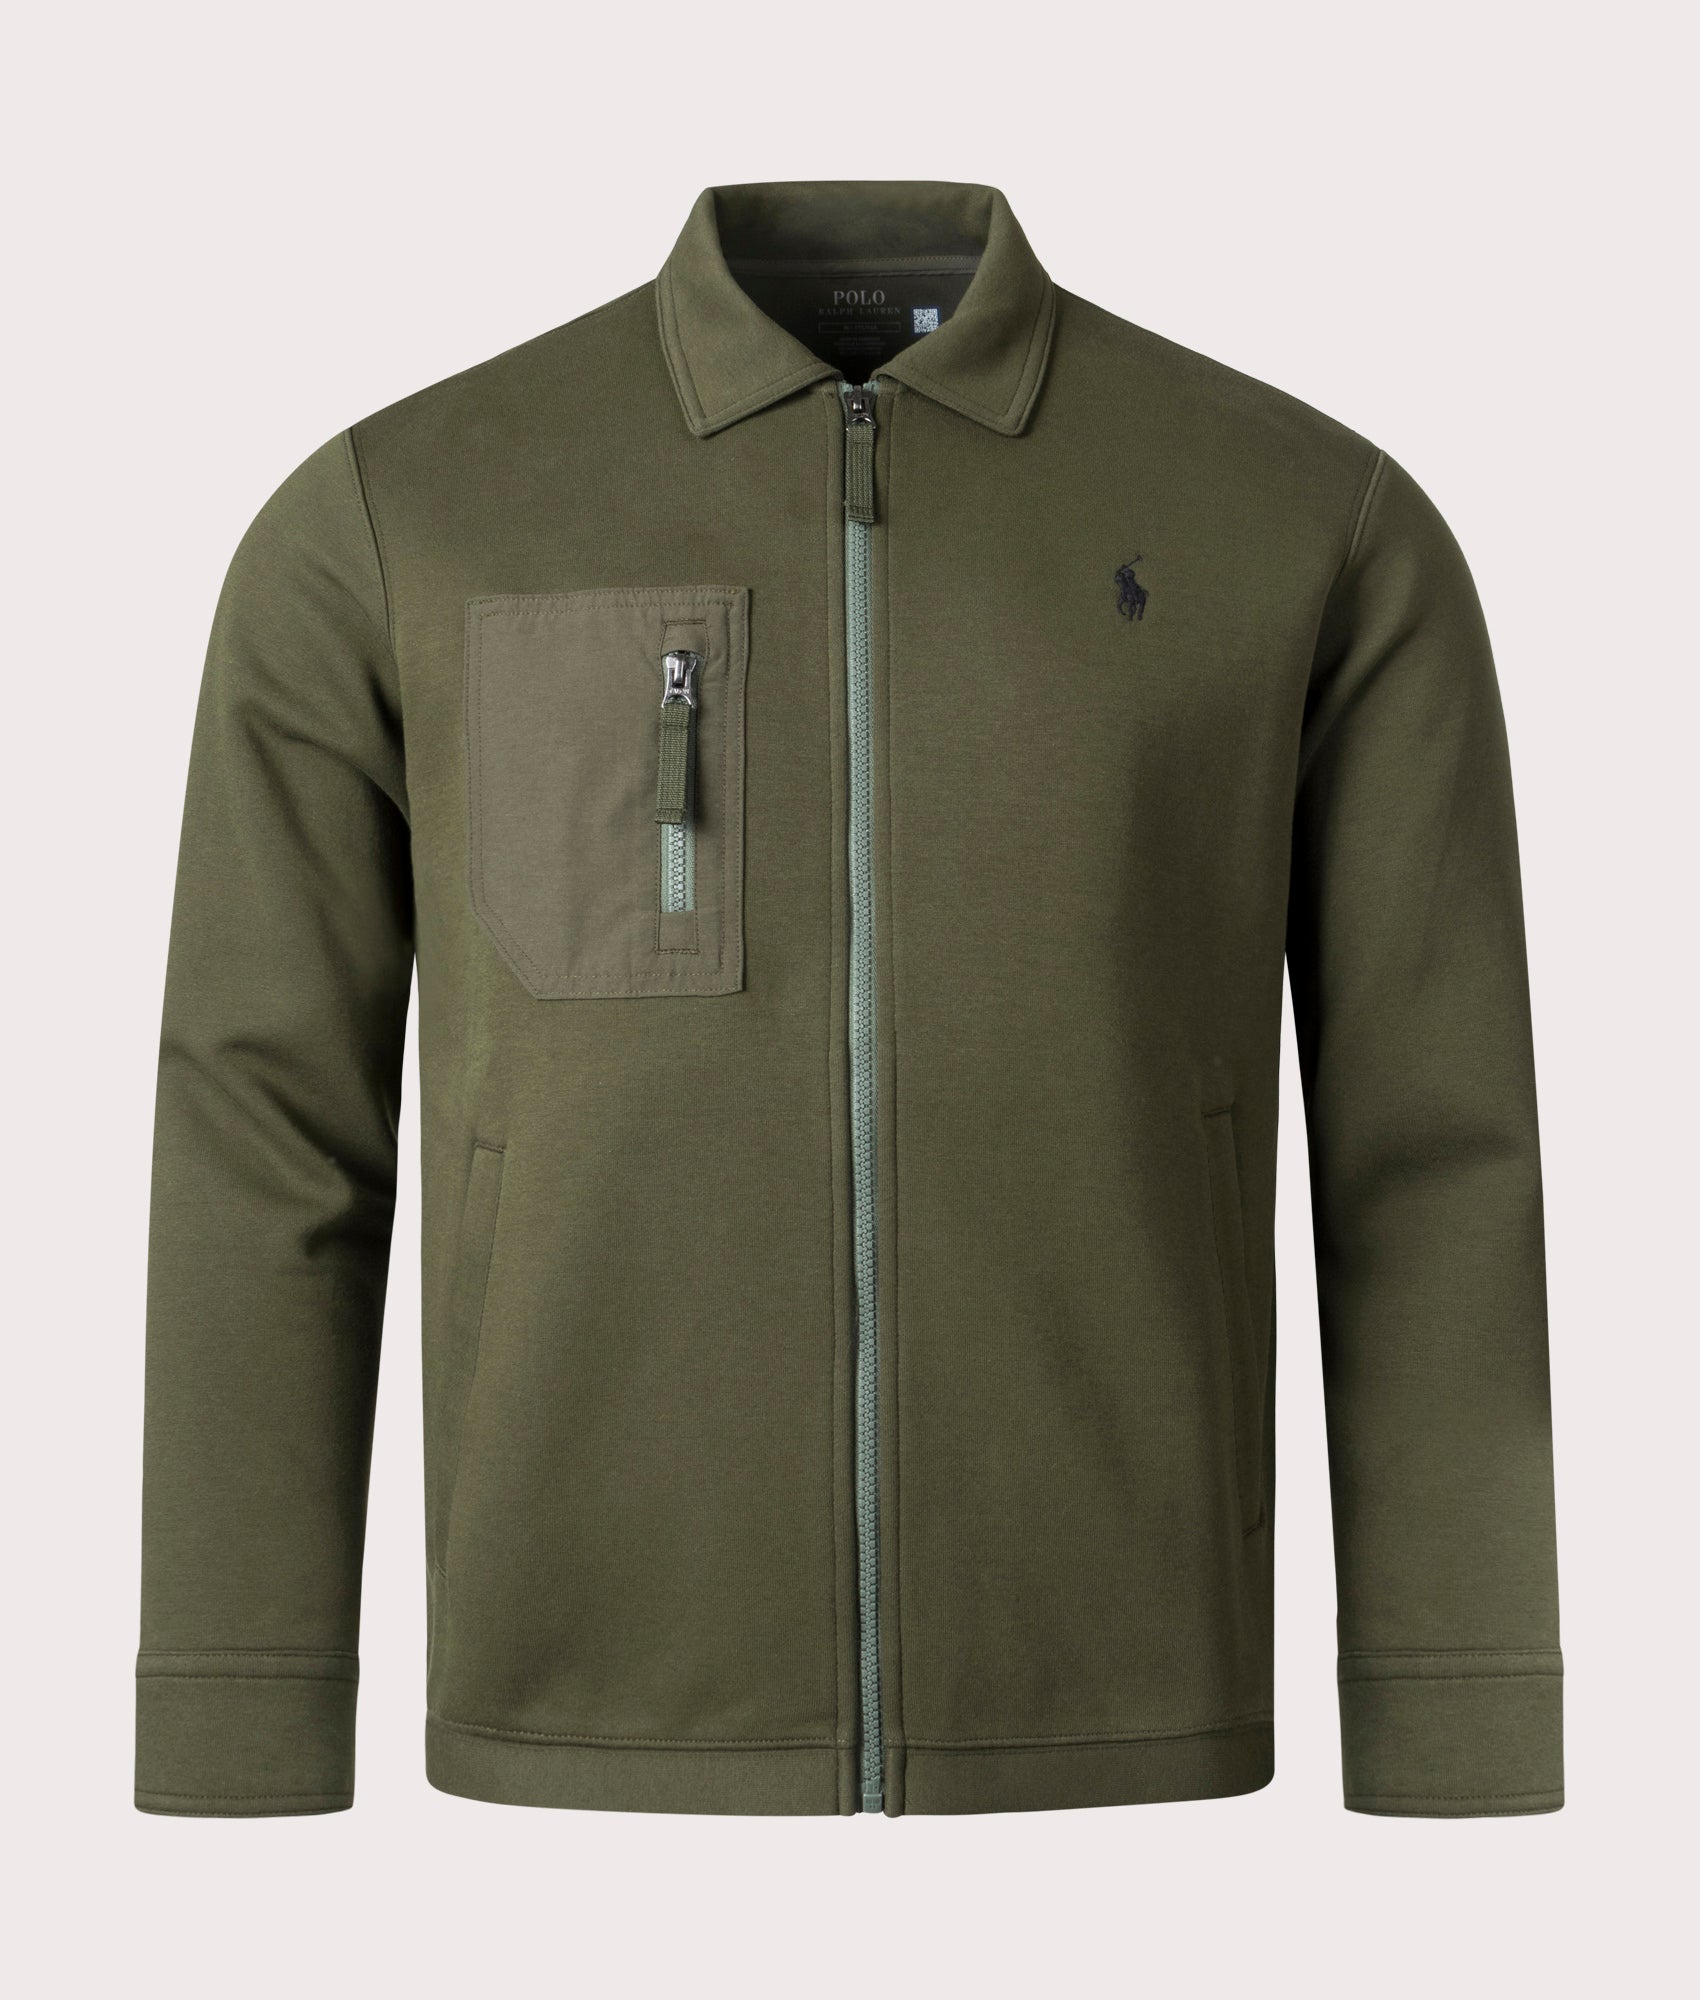 Polo Ralph Lauren Mens Zip Through Bomber Jacket - Colour: 001 Company Olive - Size: Small